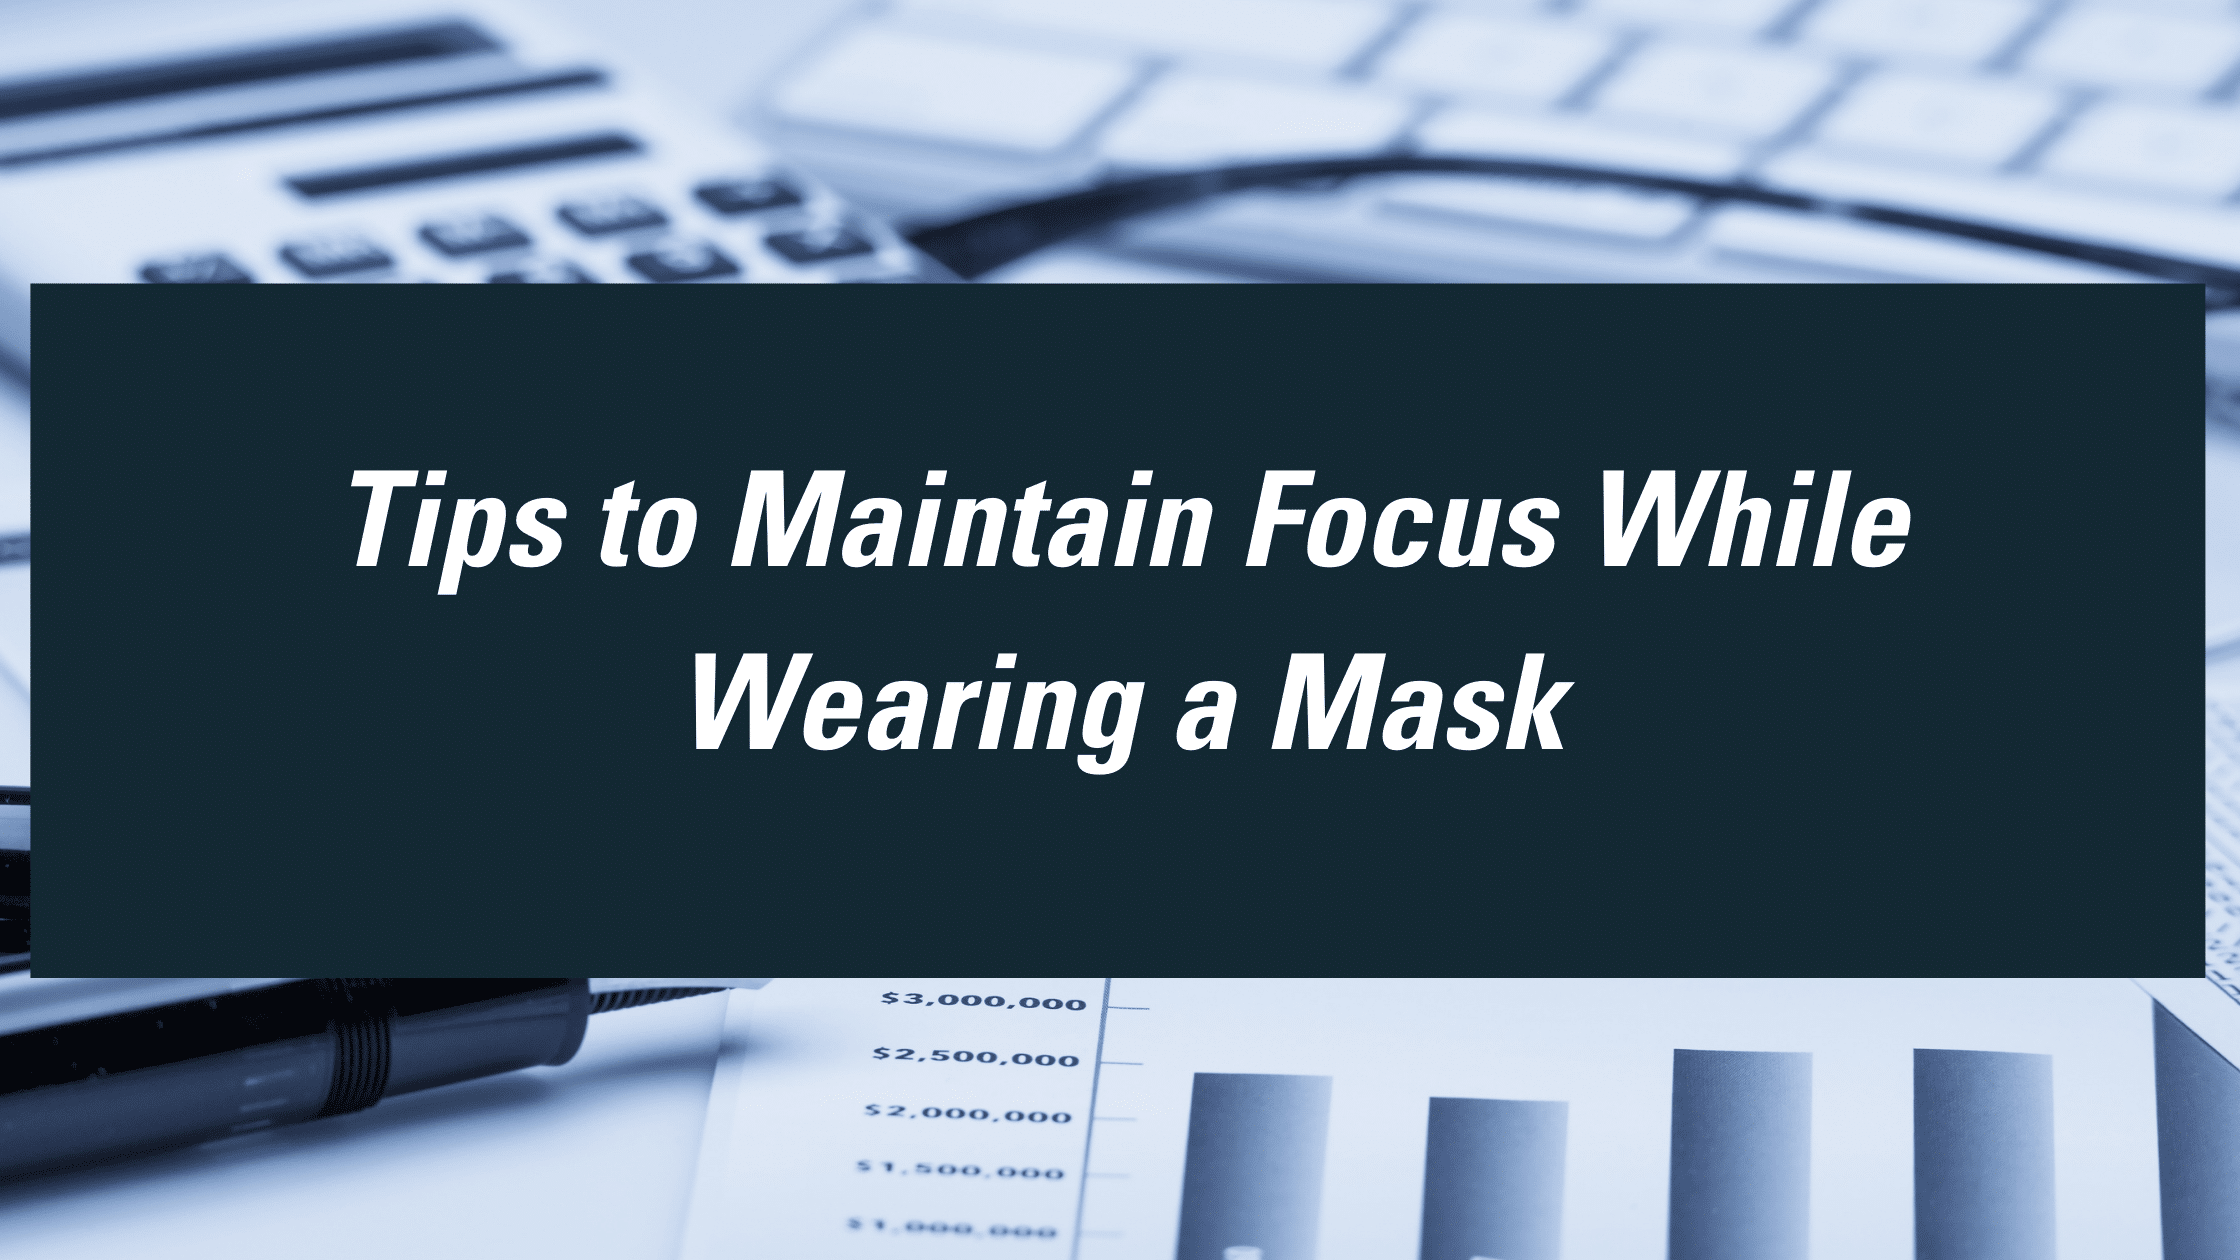 Tips to maintain focus while wearing a mask during CPA Exam